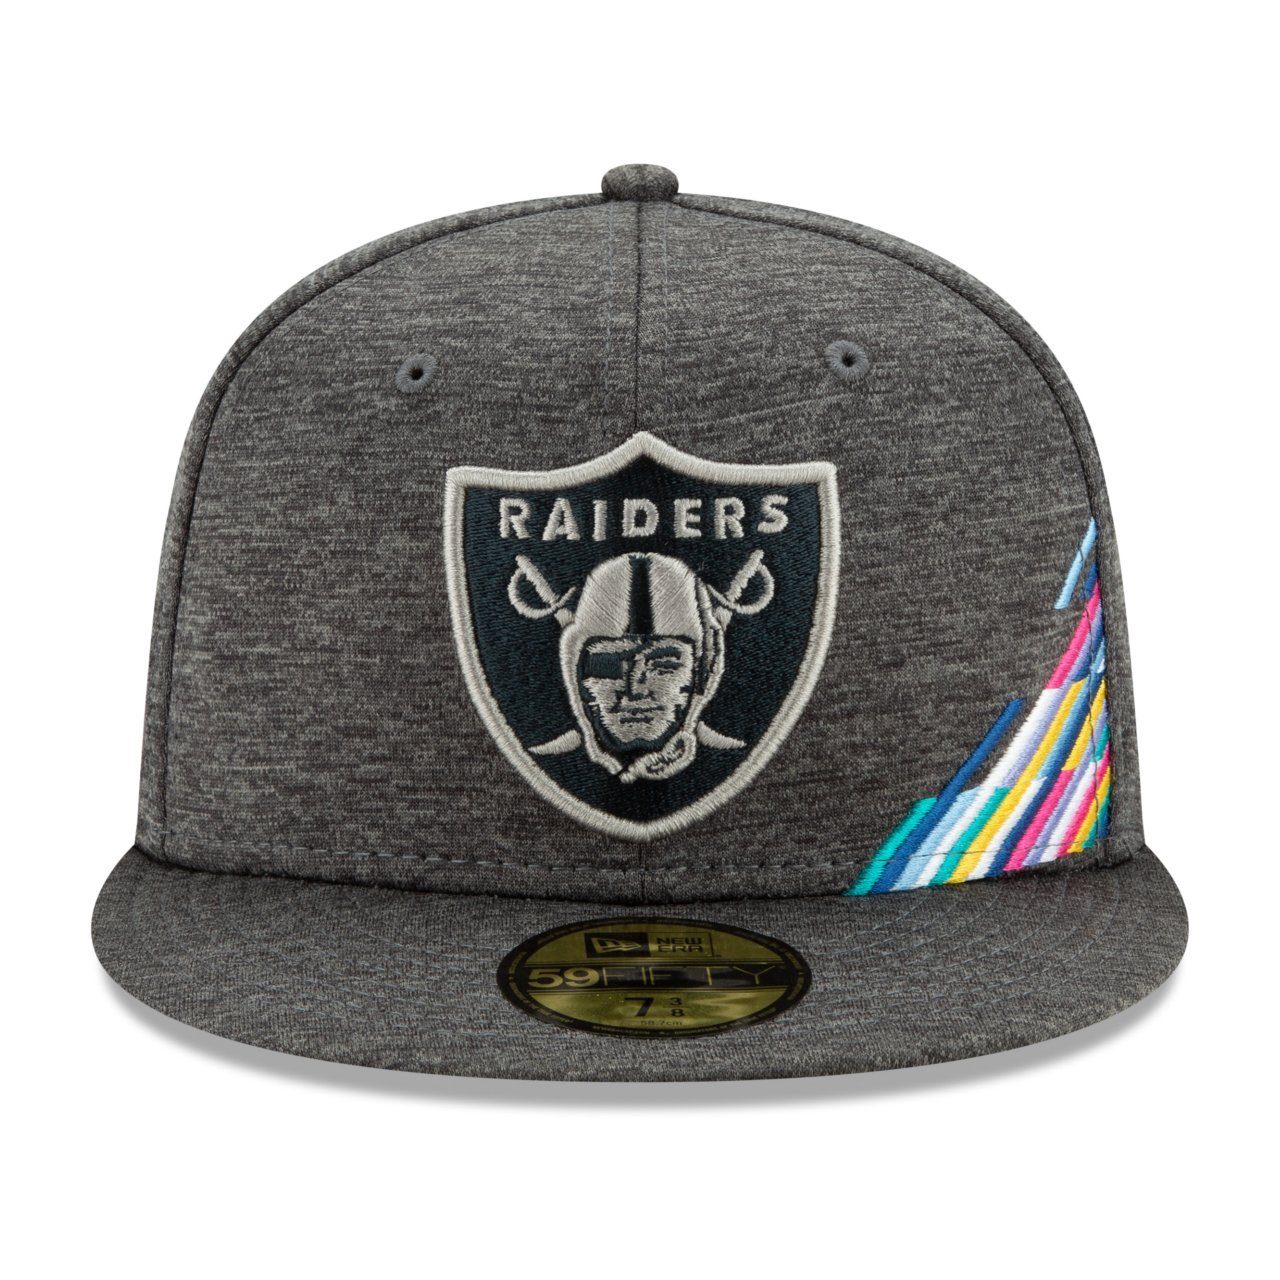 59Fifty NFL Fitted Raiders Era Cap New Oakland Teams CATCH CRUCIAL